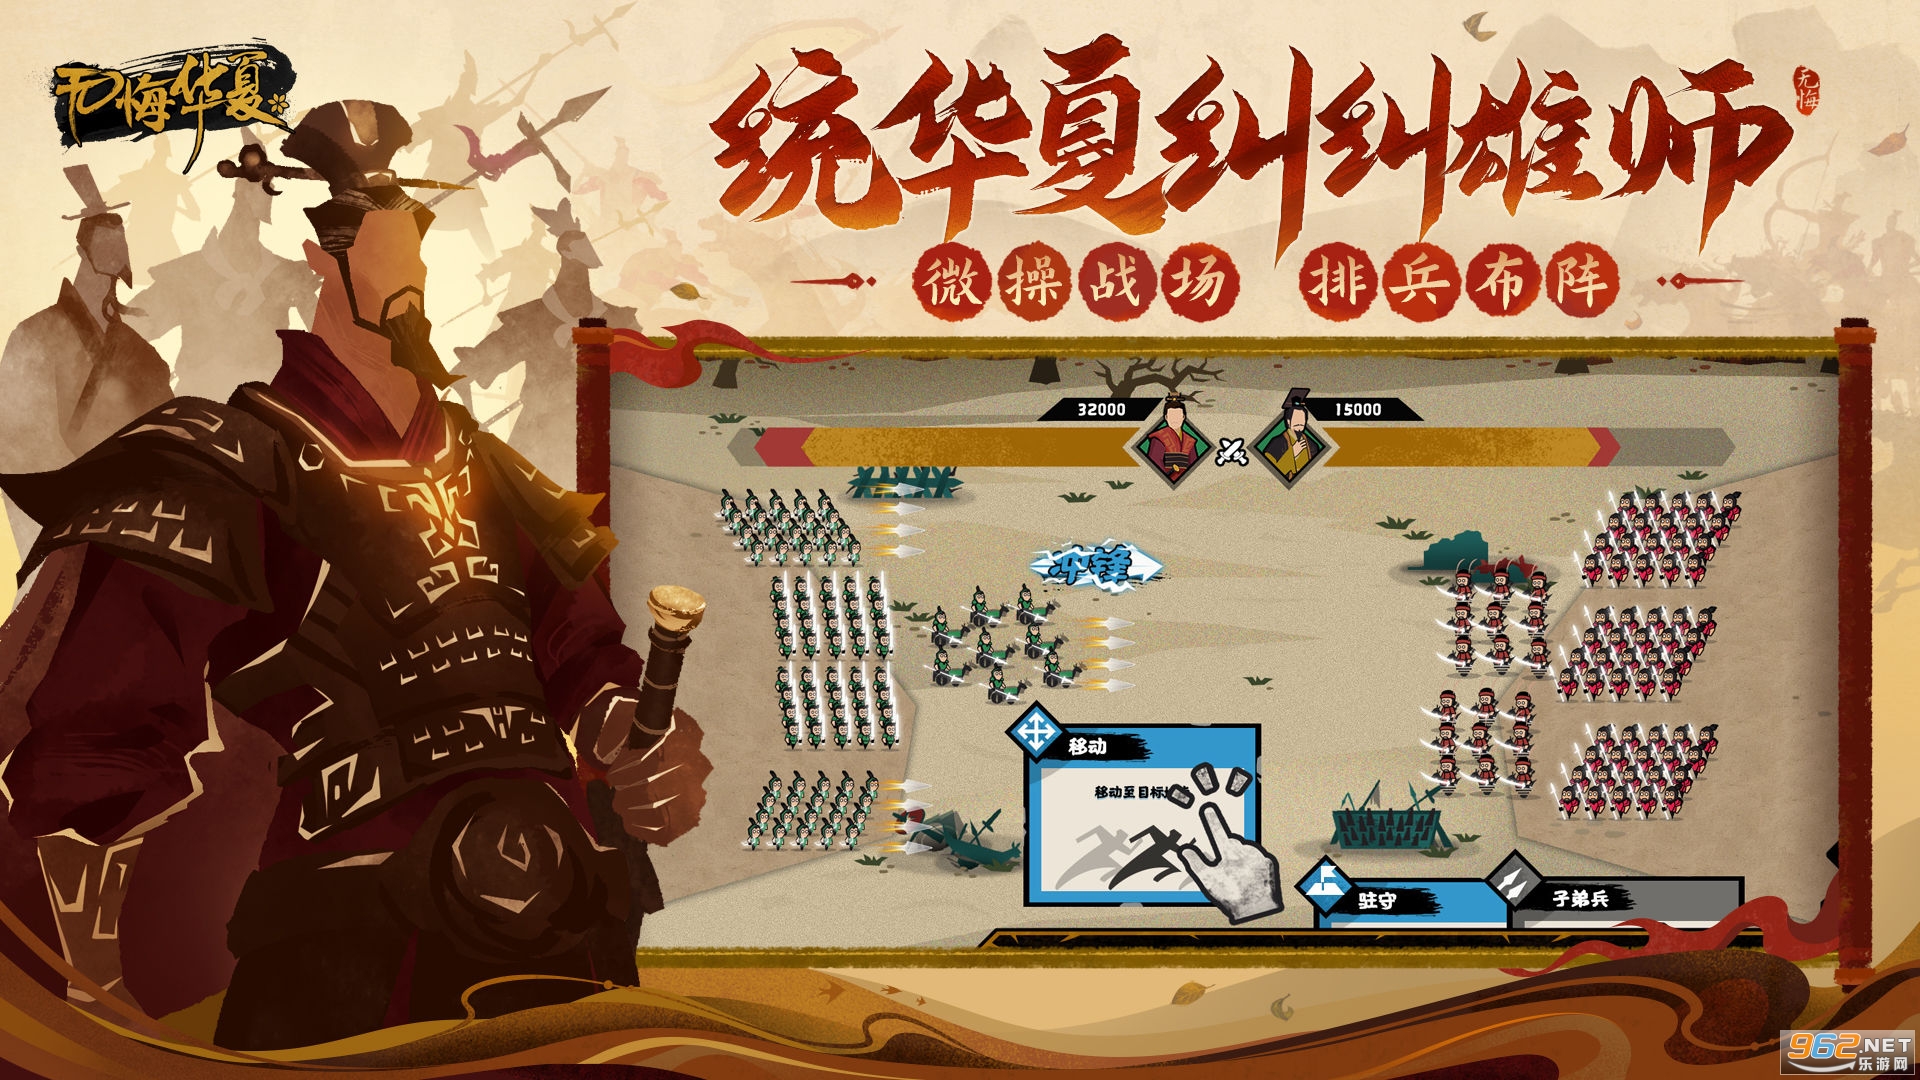  No regrets screenshot 4 of official v3.4.91 Android version of Huaxia mobile game